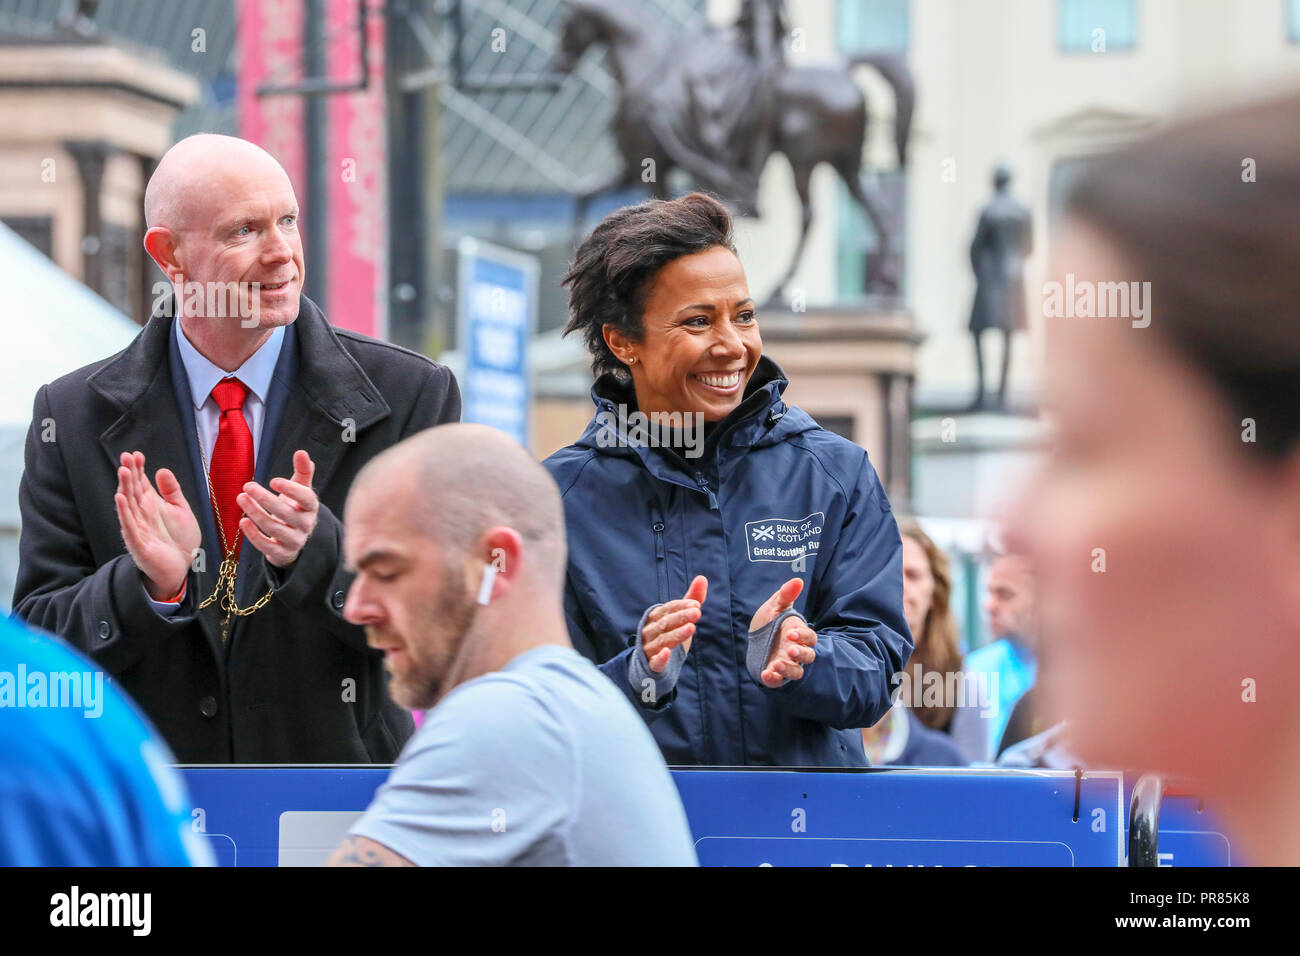 Glasgow, UK. 30th Sept 2018. Thousands of runners turned out to take part in the annual Great Scottish Run, running either 10k or half marathon, through the Glasgow city centre, across the Kingston Bridge over the River Clyde and finishing at Glasgow Green. The runners were cheered off by Colonel Dame Kelly Holmes who was this years Ambassador for the Run Credit: Findlay/Alamy Live News Stock Photo